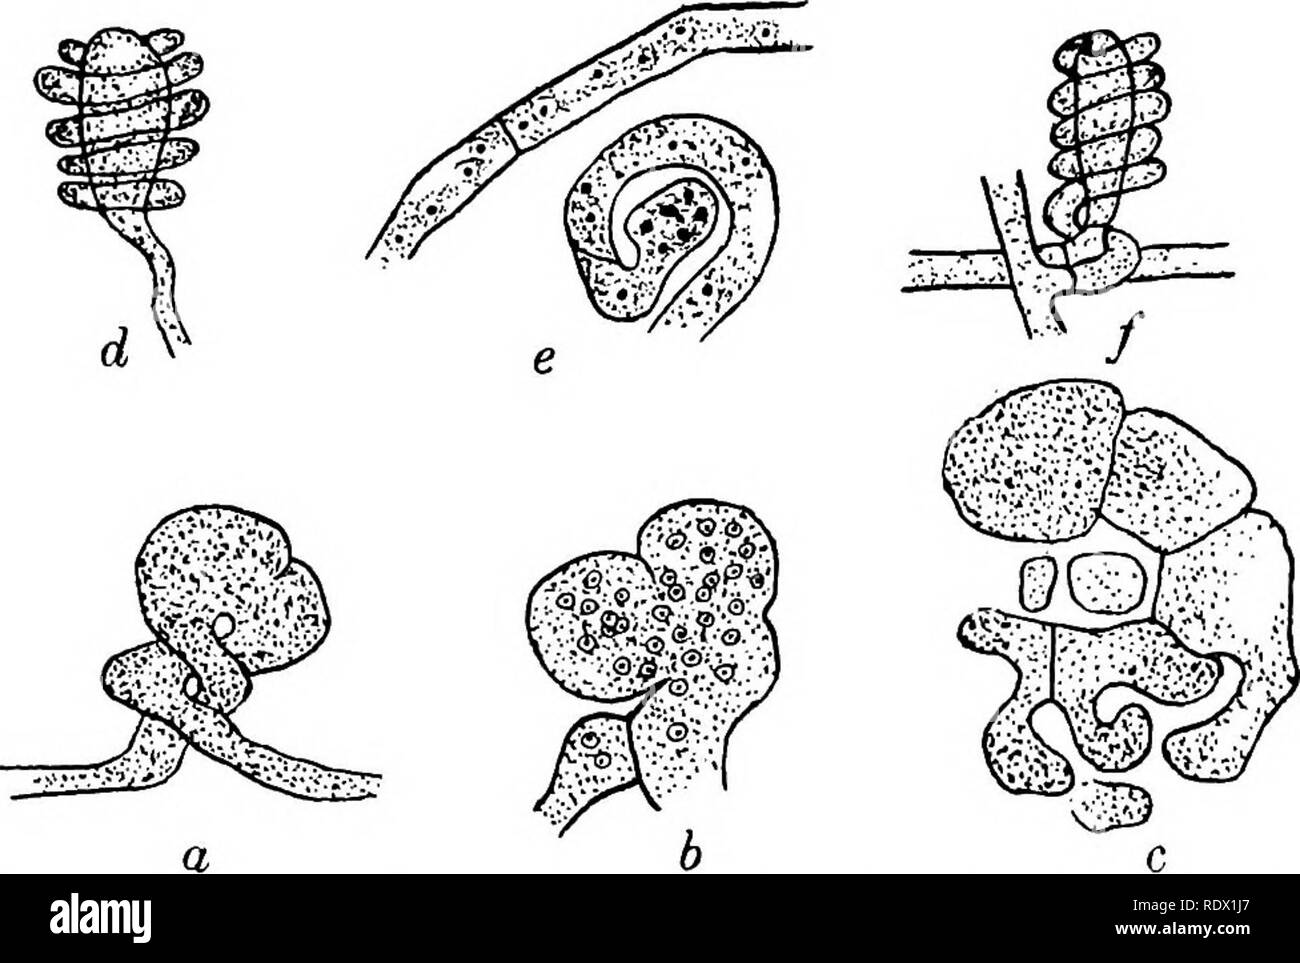 . Fungi, ascomycetes, ustilaginales, uredinales. Fungi. in] PLECTASCALES 67 In G. Candidas (fig. 27 d) the antheridium and oogonium already differ in form at the time of their union, and, in the majority of cases, appear to. Fig. 27. Gymnoascus Reesil Baran.; a. surface view of conjugating cells; b. the same in longitudinal section; t. a later stage, septate oogonium giving rise to ascogenous hyphae; Gymnoascus candithcs Eidam; d, surface view of conjugating cells; e. same in longitudinal section; all after Dale. Ctenomyces serratus Eidam; f. surface view of con- jugating cells, X400; after Ei Stock Photo